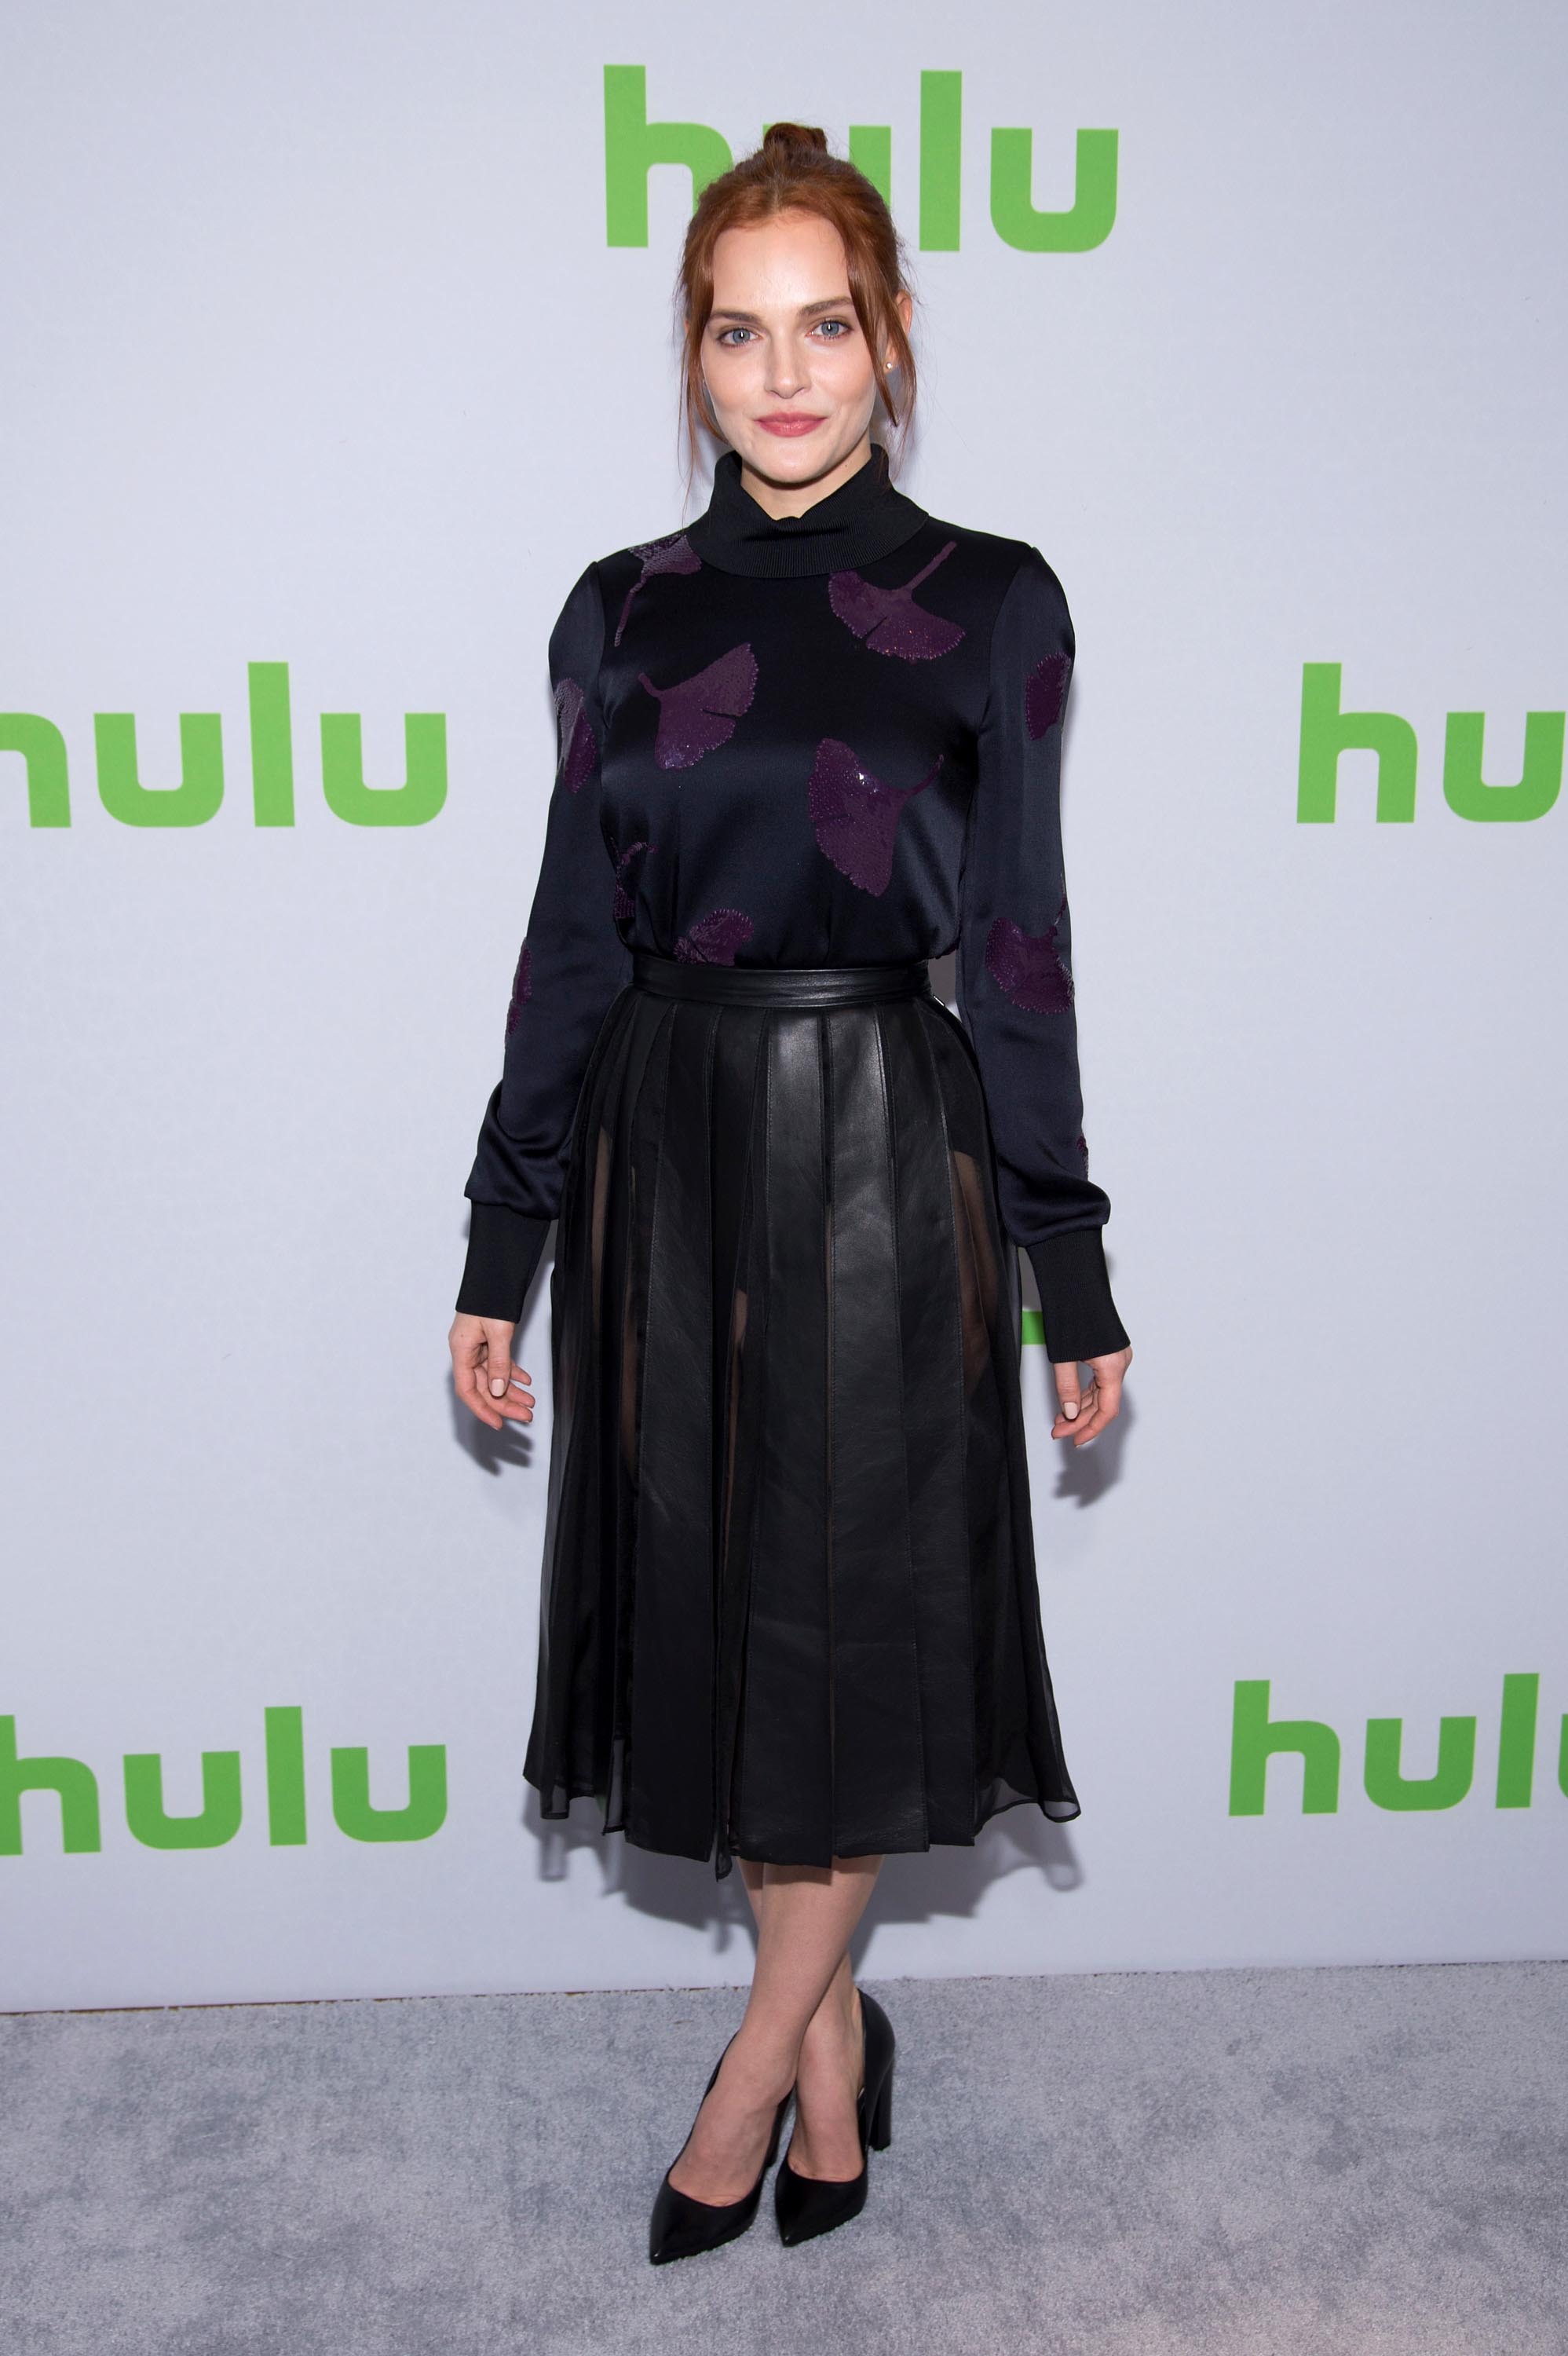 Madeline Brewer attends the Hulu TCA Winter Press Tour Day